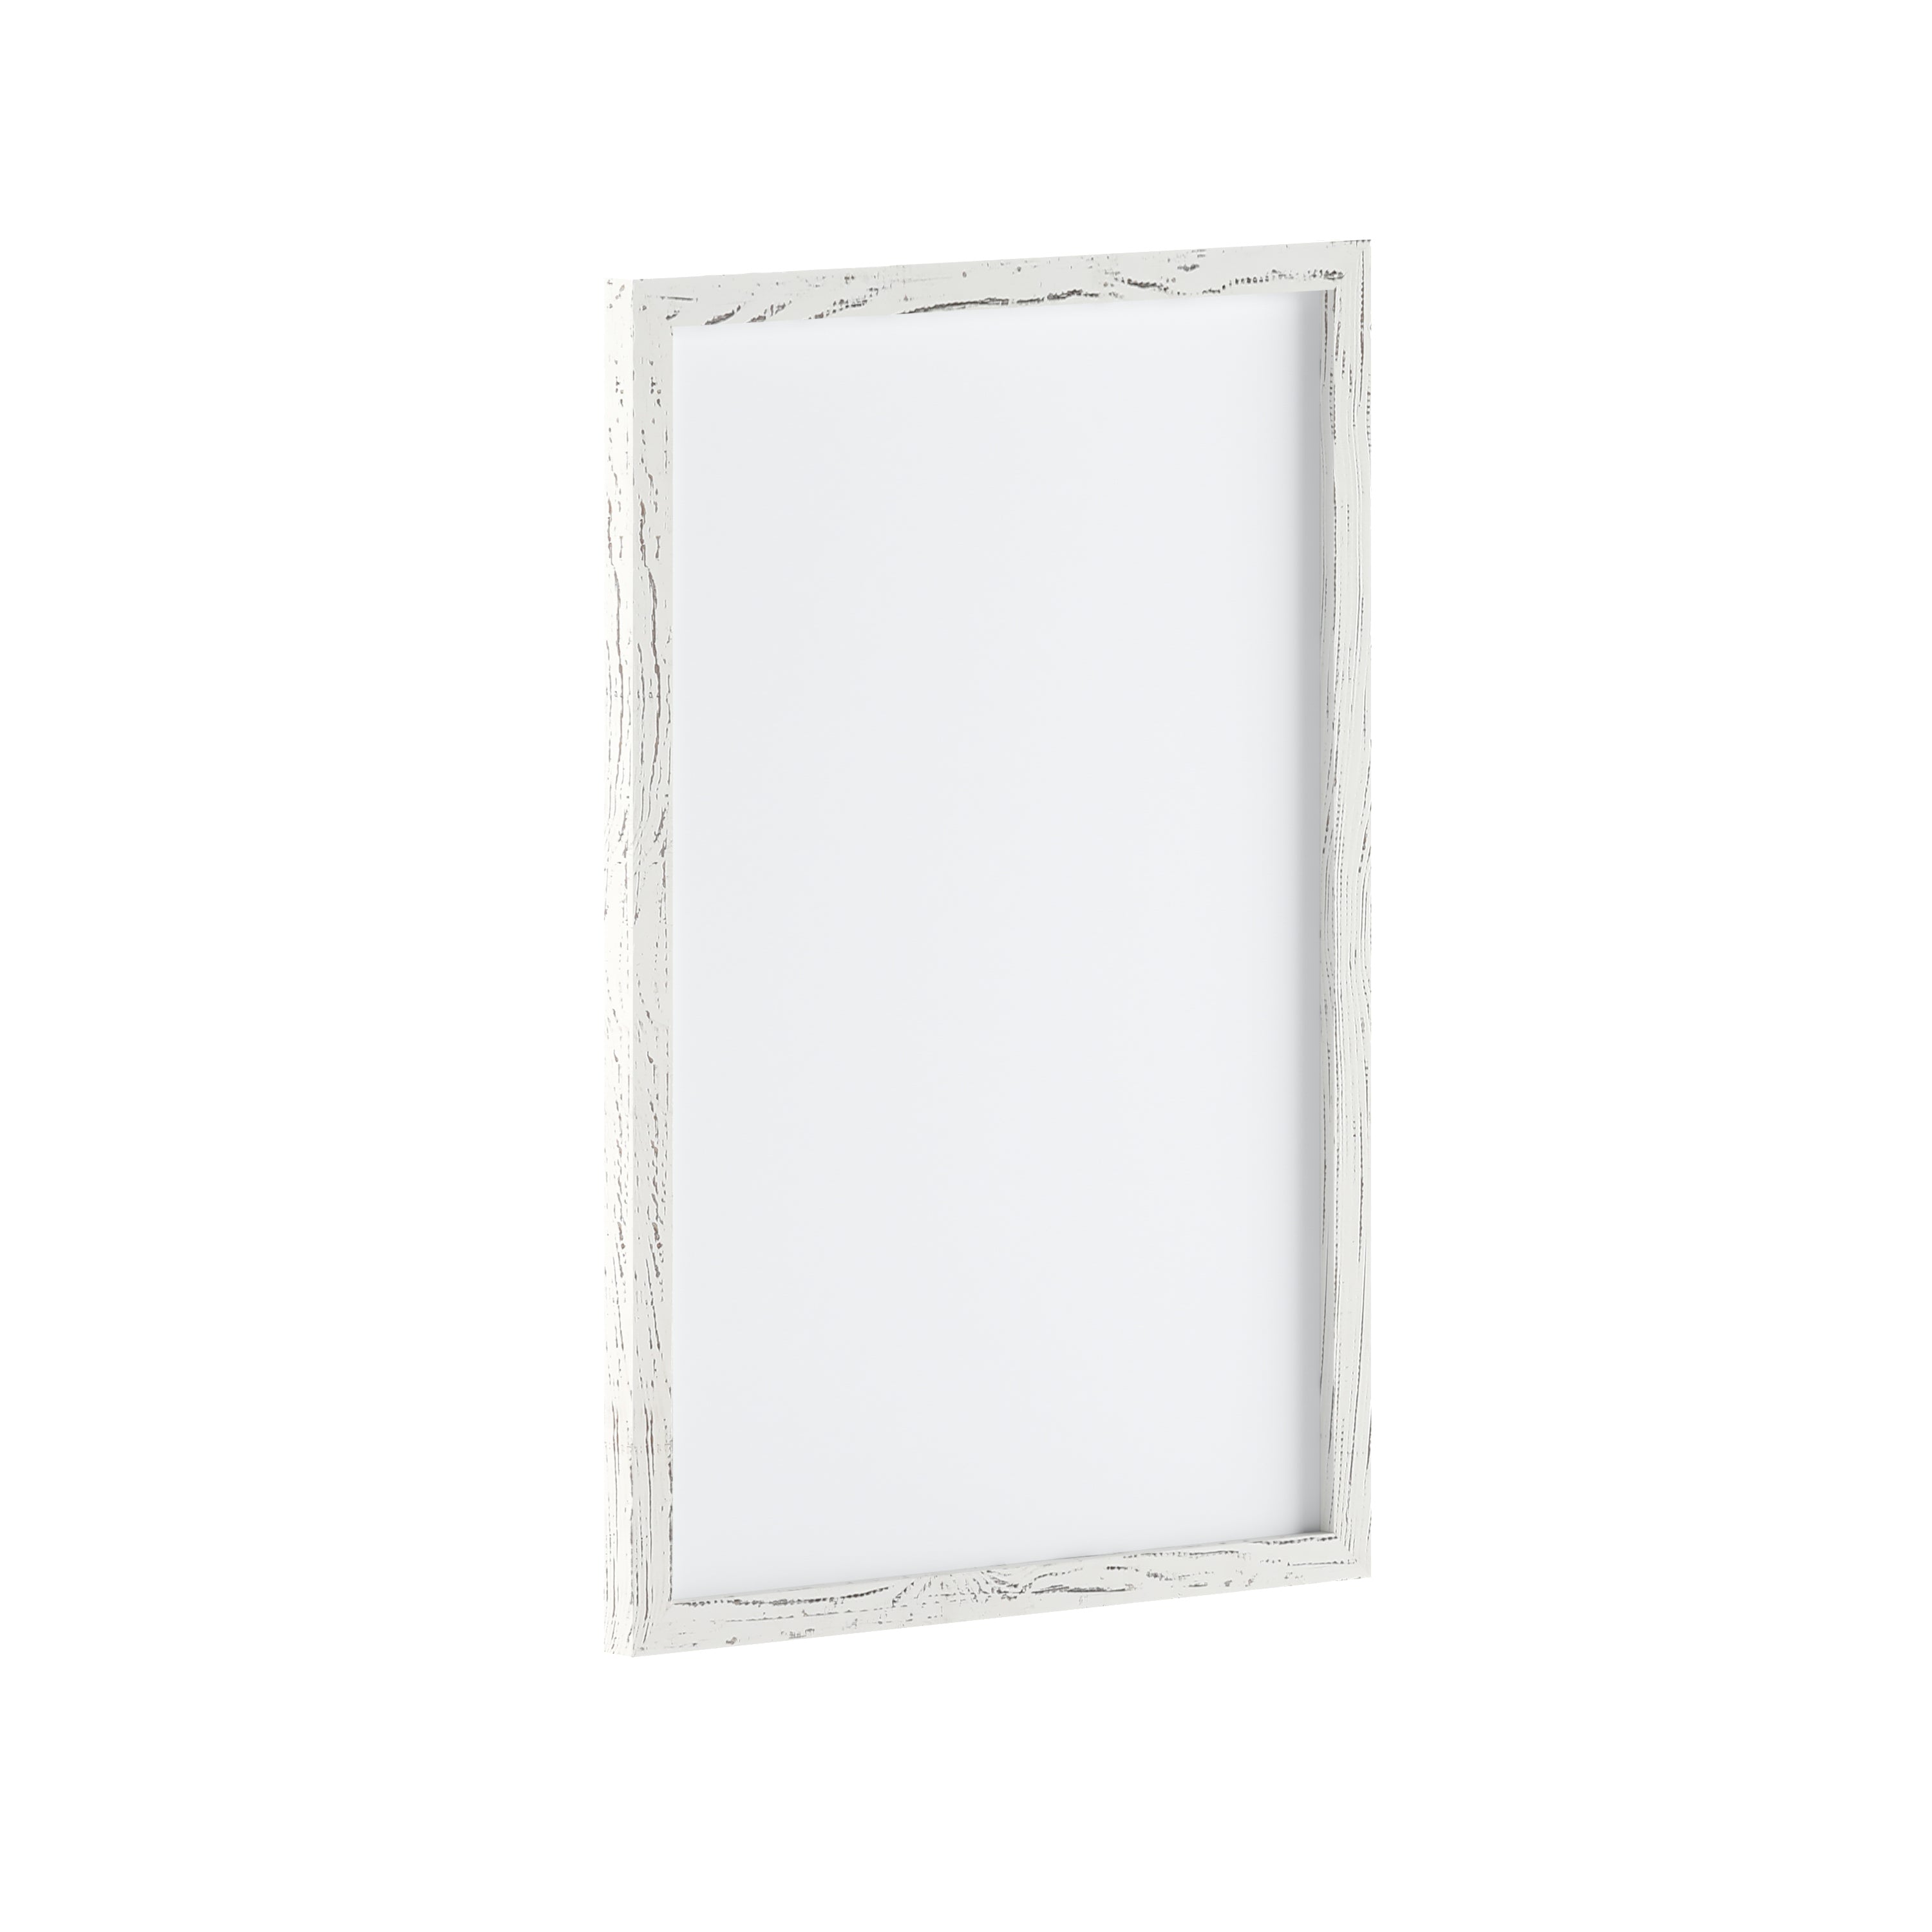 Bristol Wall Mount White Board with Included Dry Erase Marker, 4 Magnets, and Eraser for Home, School or Business-White Boards-Flash Furniture-Wall2Wall Furnishings